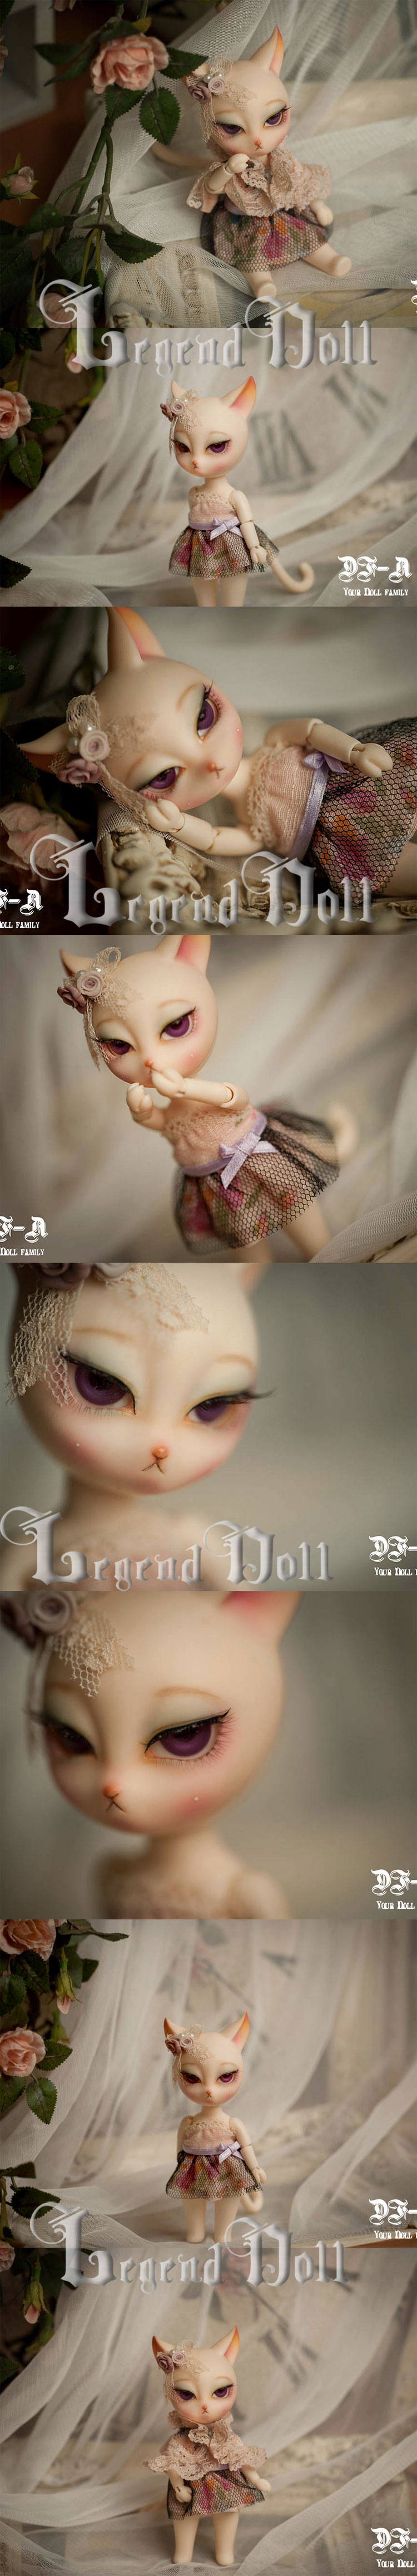 BJD NEI 12cm Ball-jointed doll